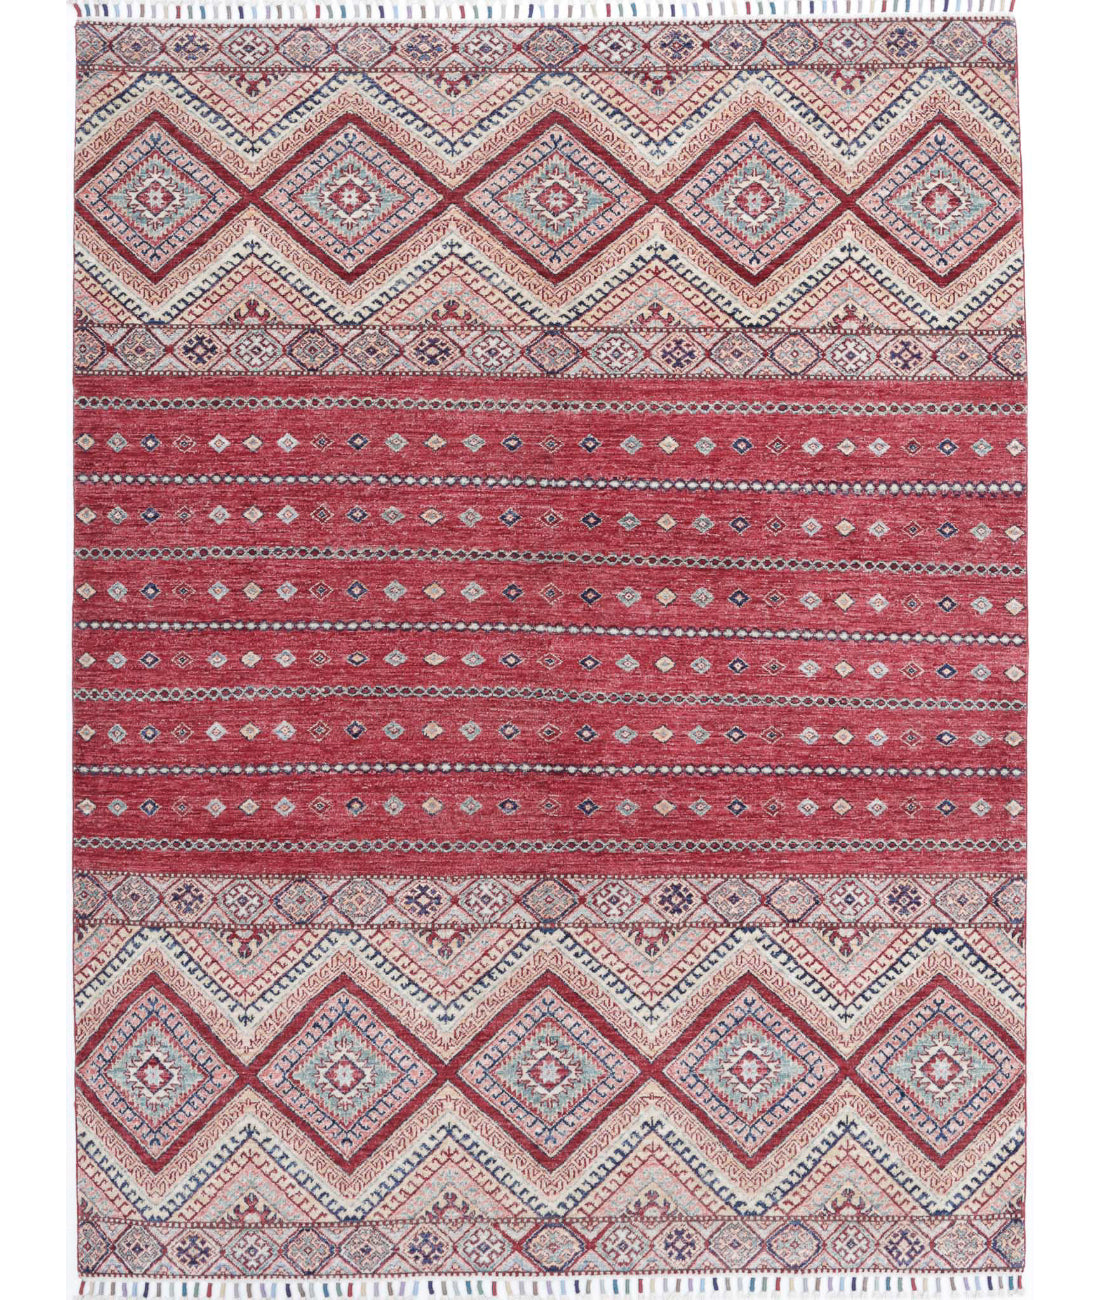 Hand Knotted Khurjeen Wool Rug - 5'6'' x 7'6'' 5'6'' x 7'6'' (165 X 225) / Multi / Red